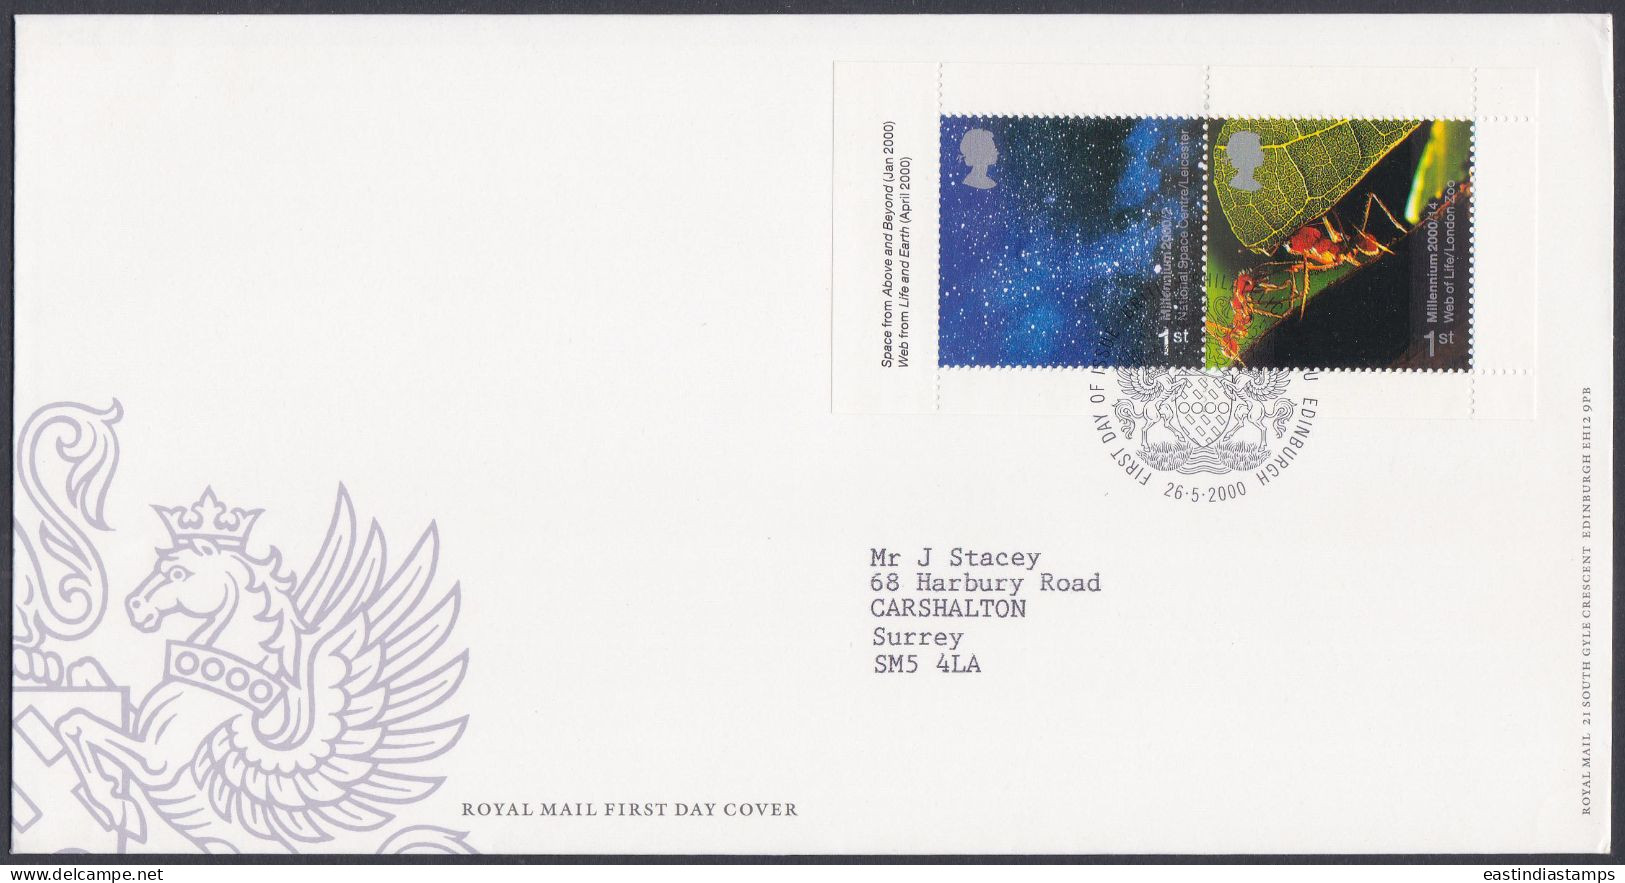 GB Great Britain 2000 FDC Space, Stars, Ant, Insect, London Zoo, Se-tenant, Pictorial Postmark, First Day Cover - Covers & Documents